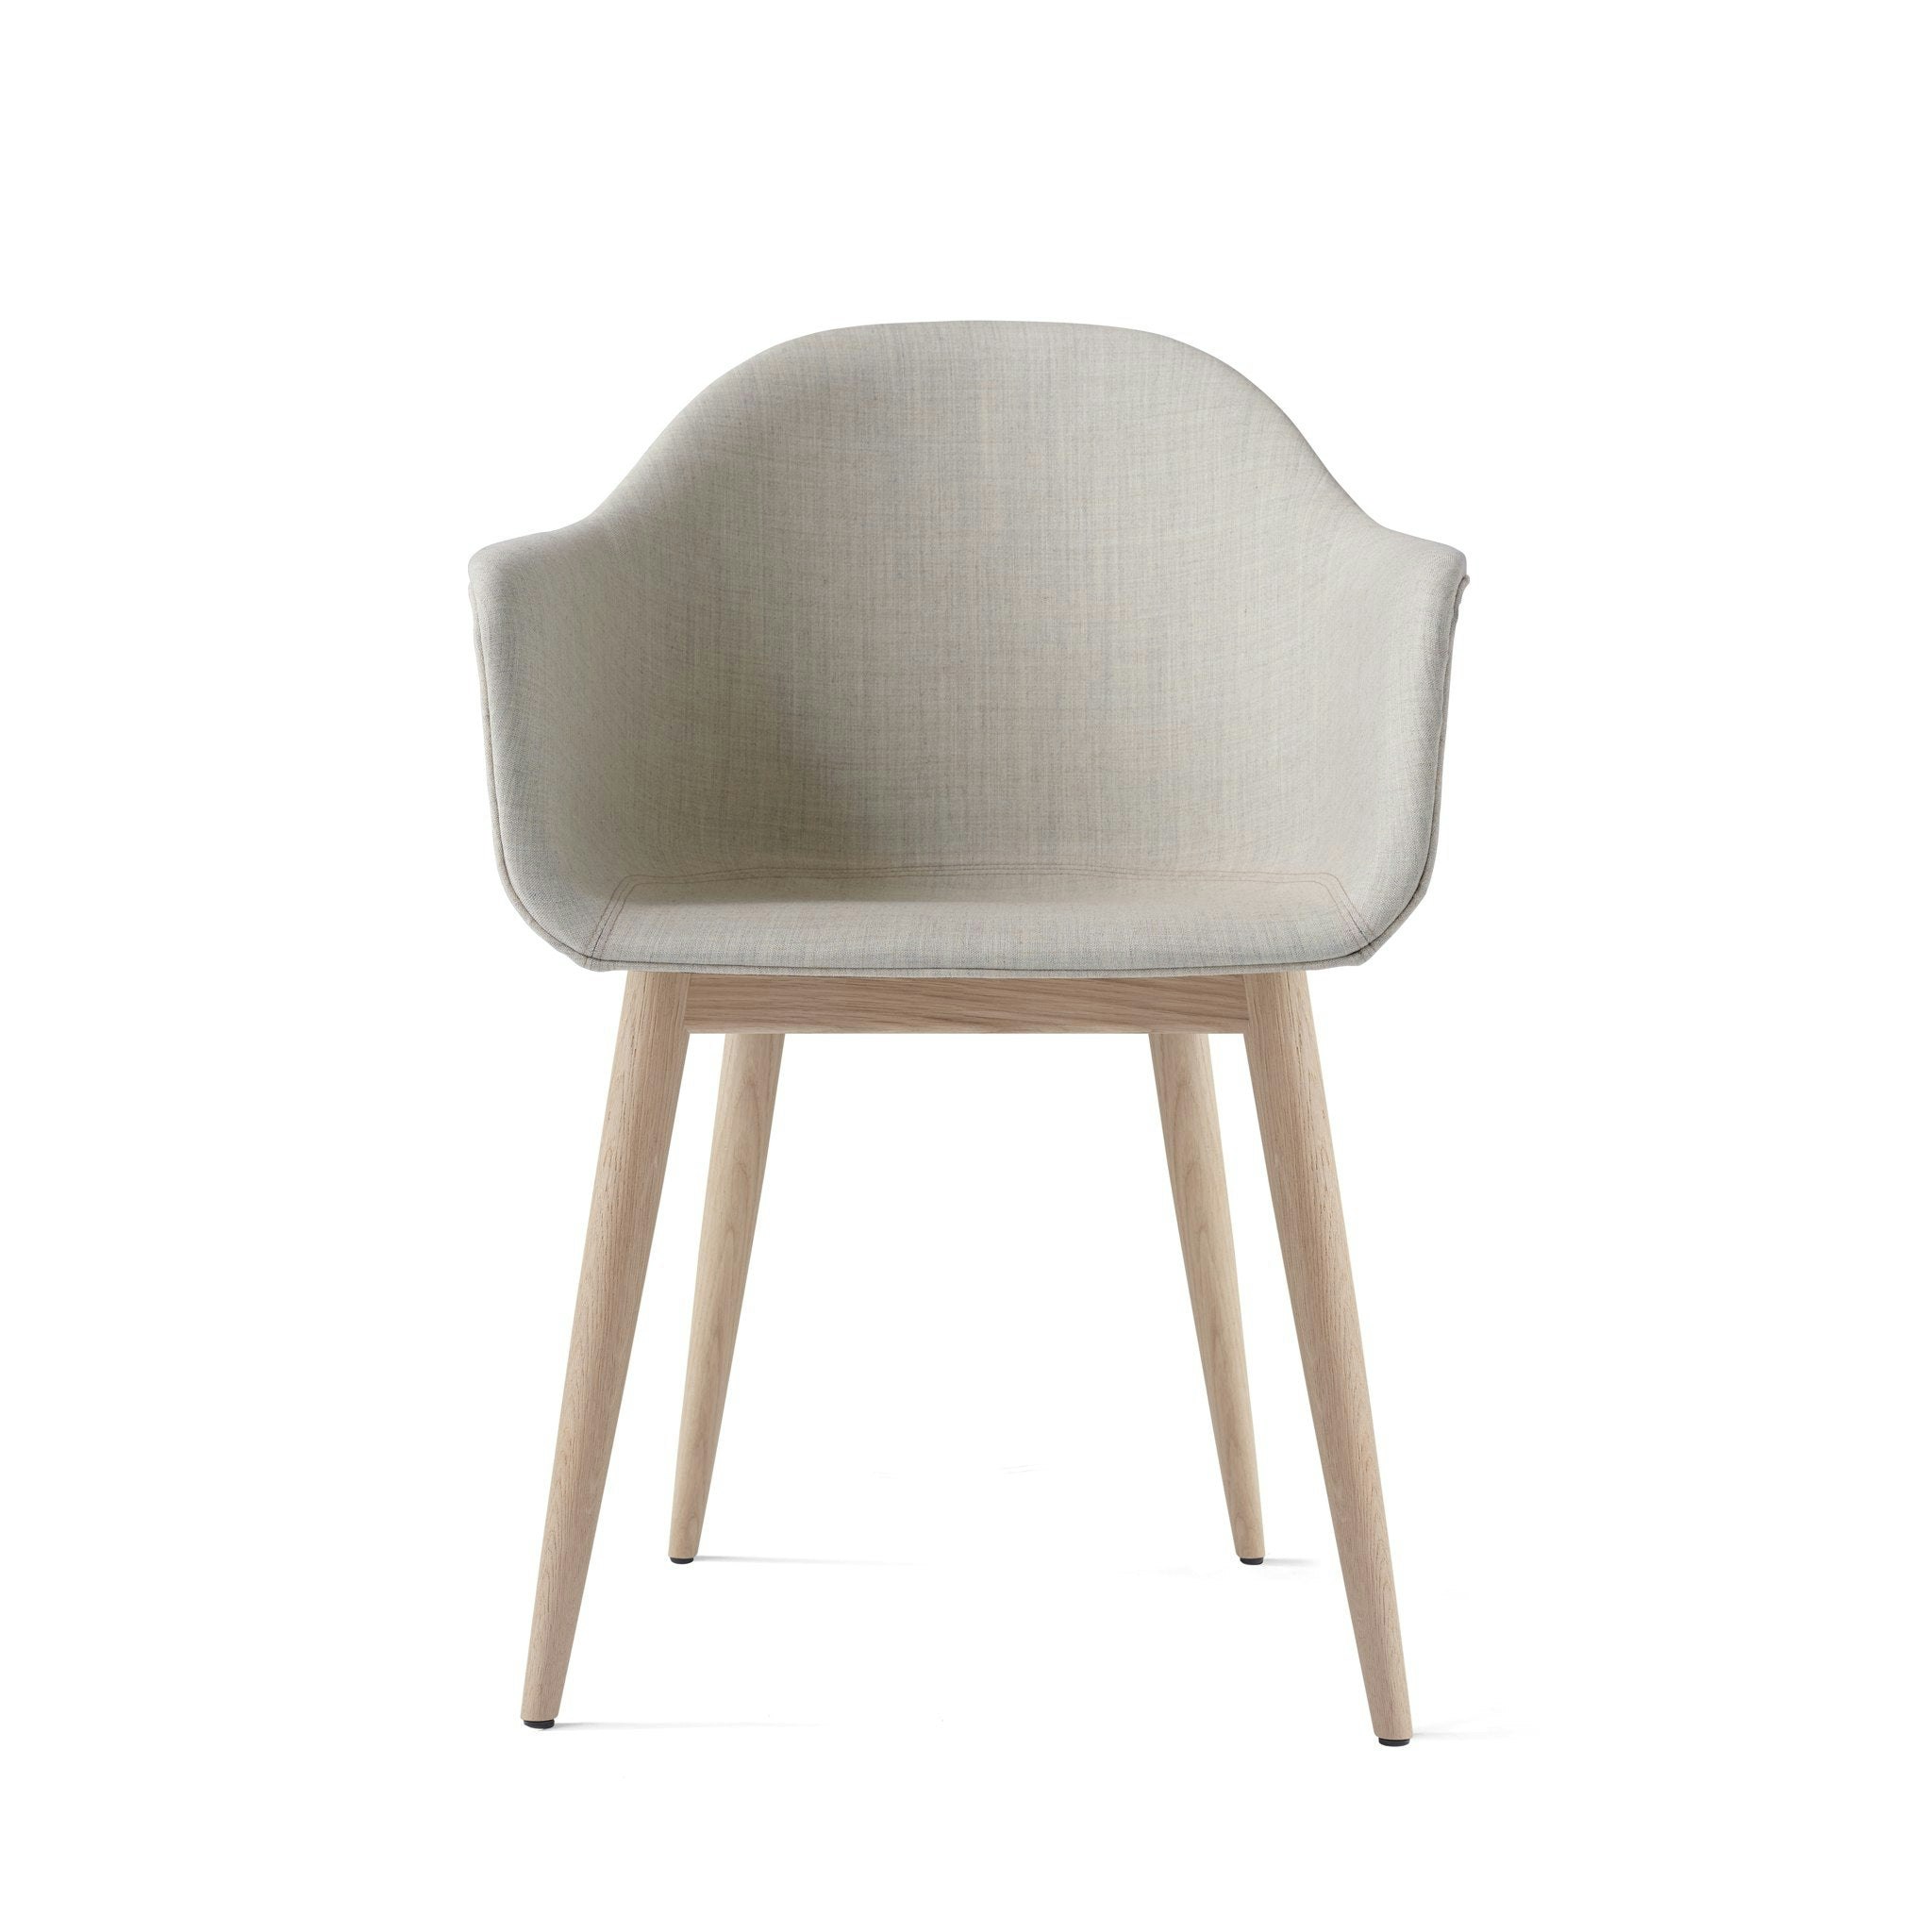 Harbour Chair Upholstered with Wood Base by Menu